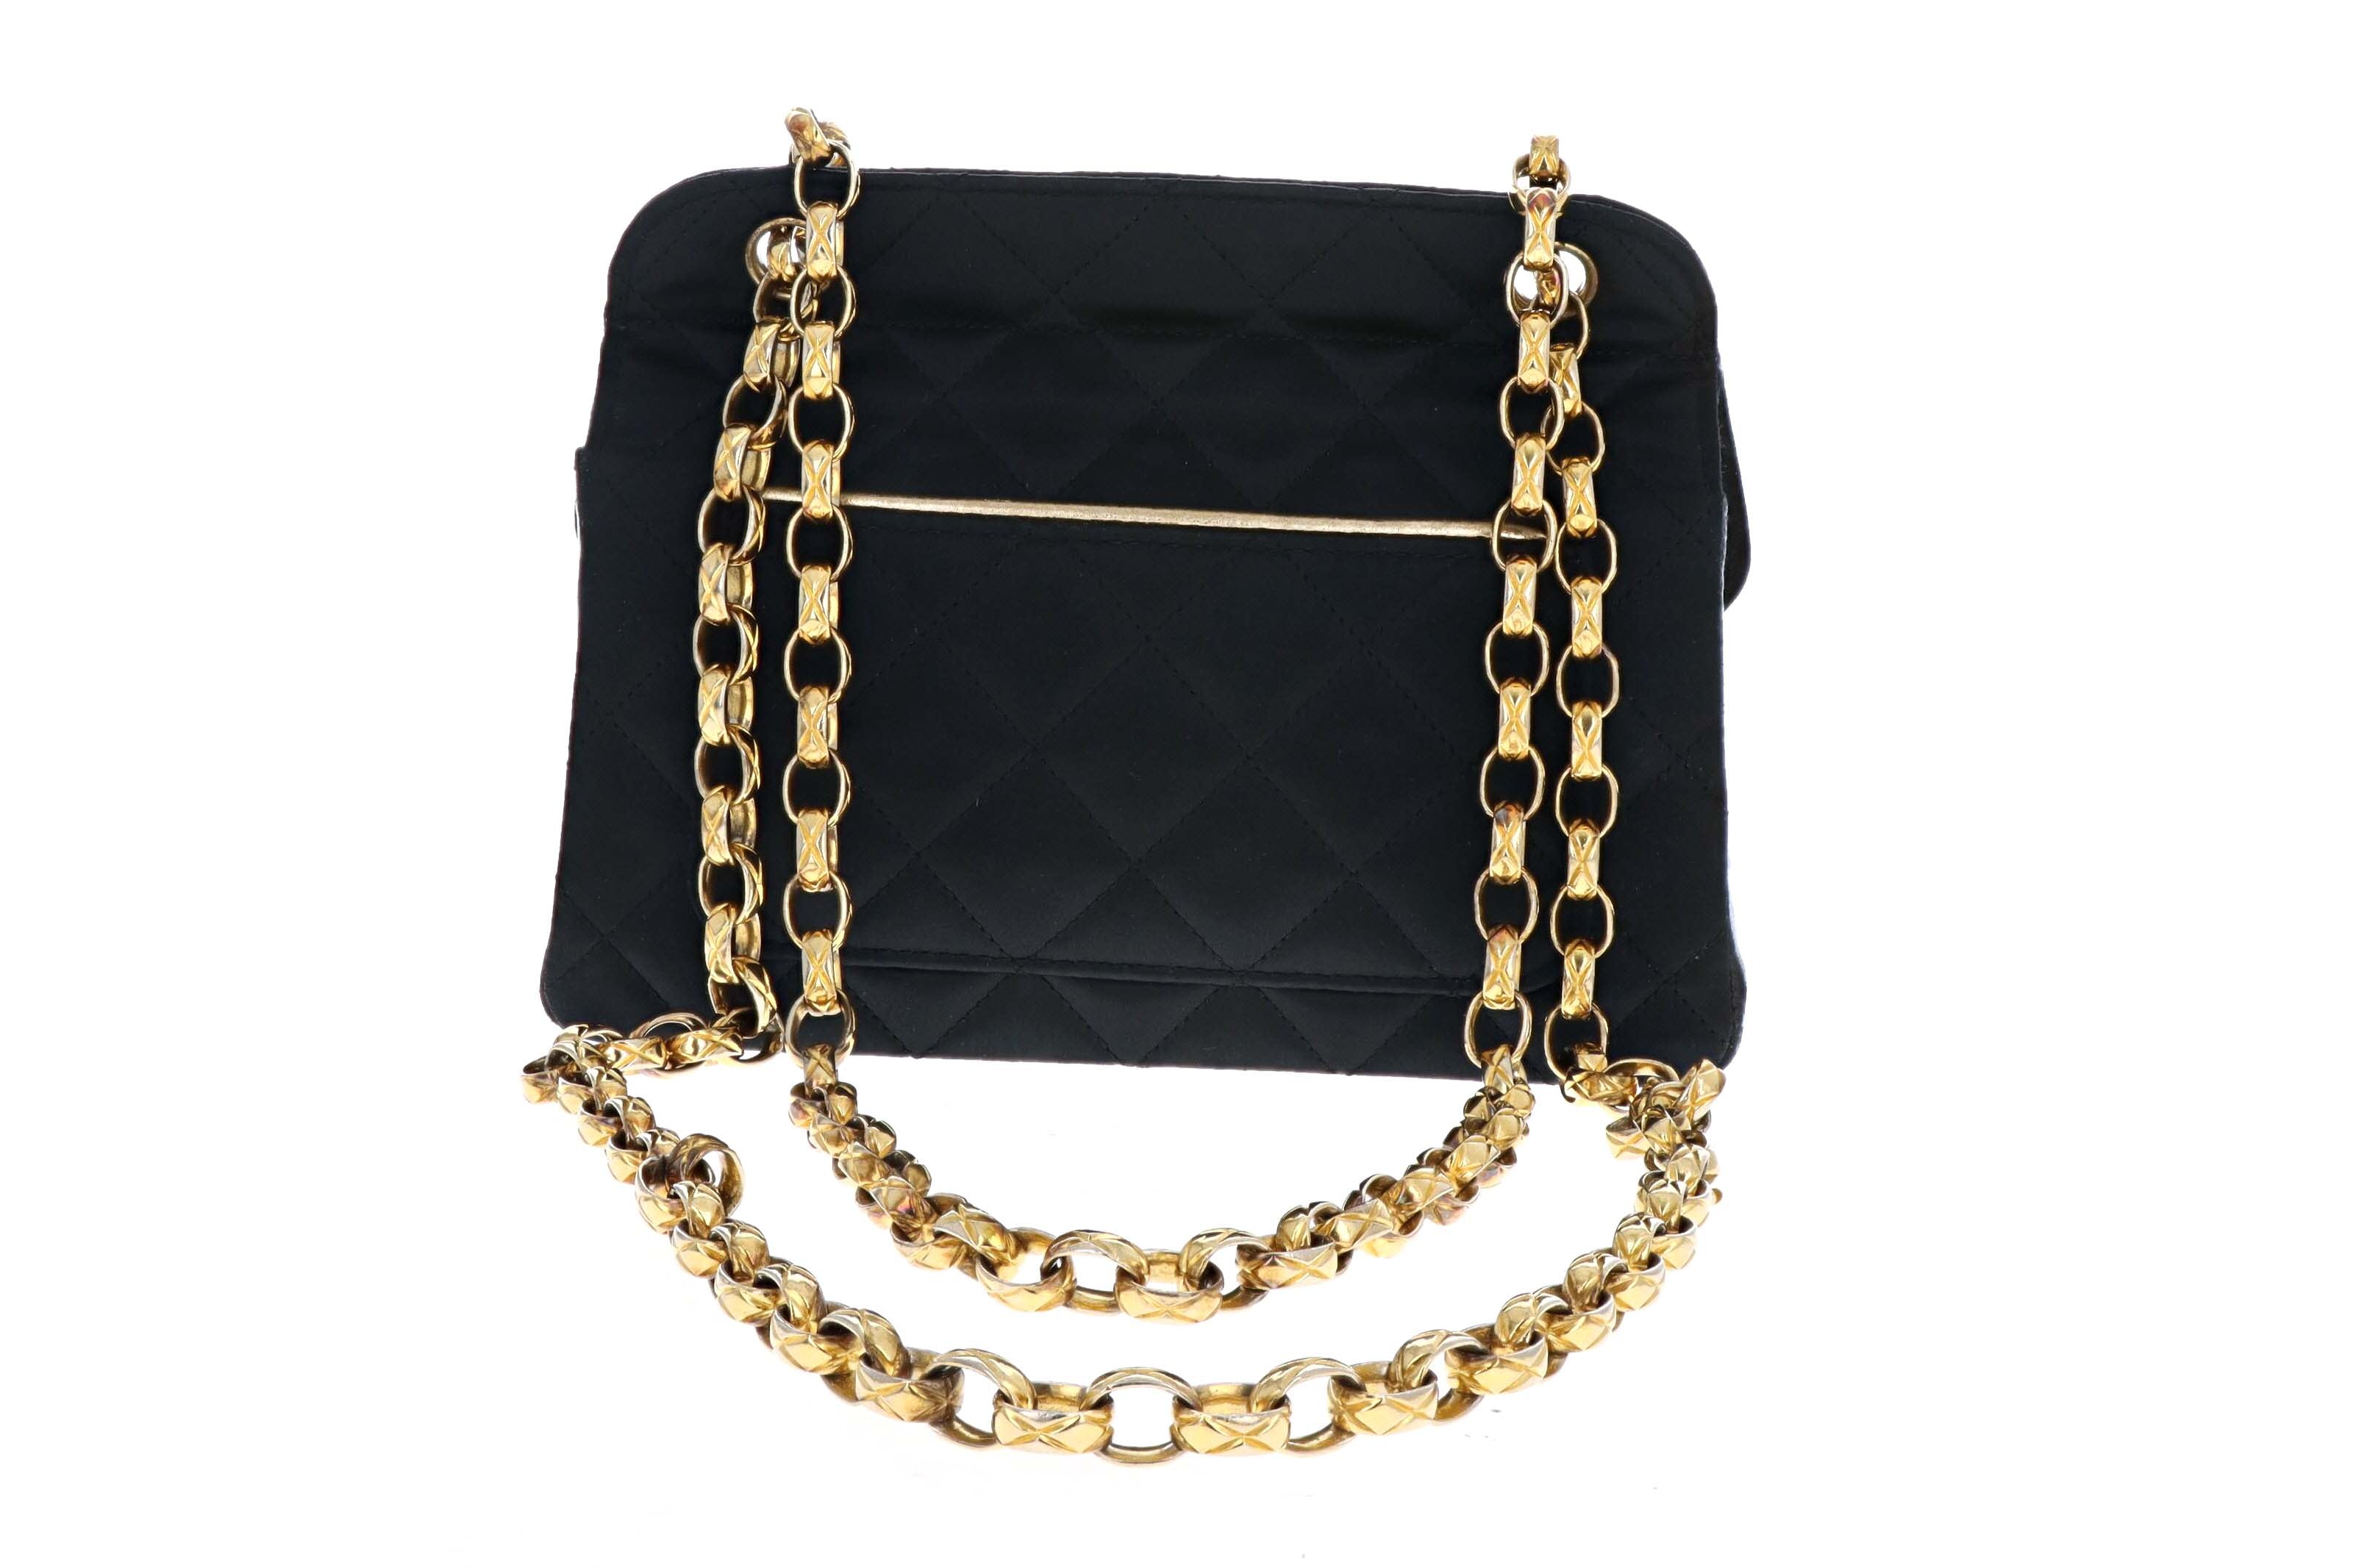 Queen May - Chanel Vintage Satin Bijoux Chain Mini Bag with Wallet